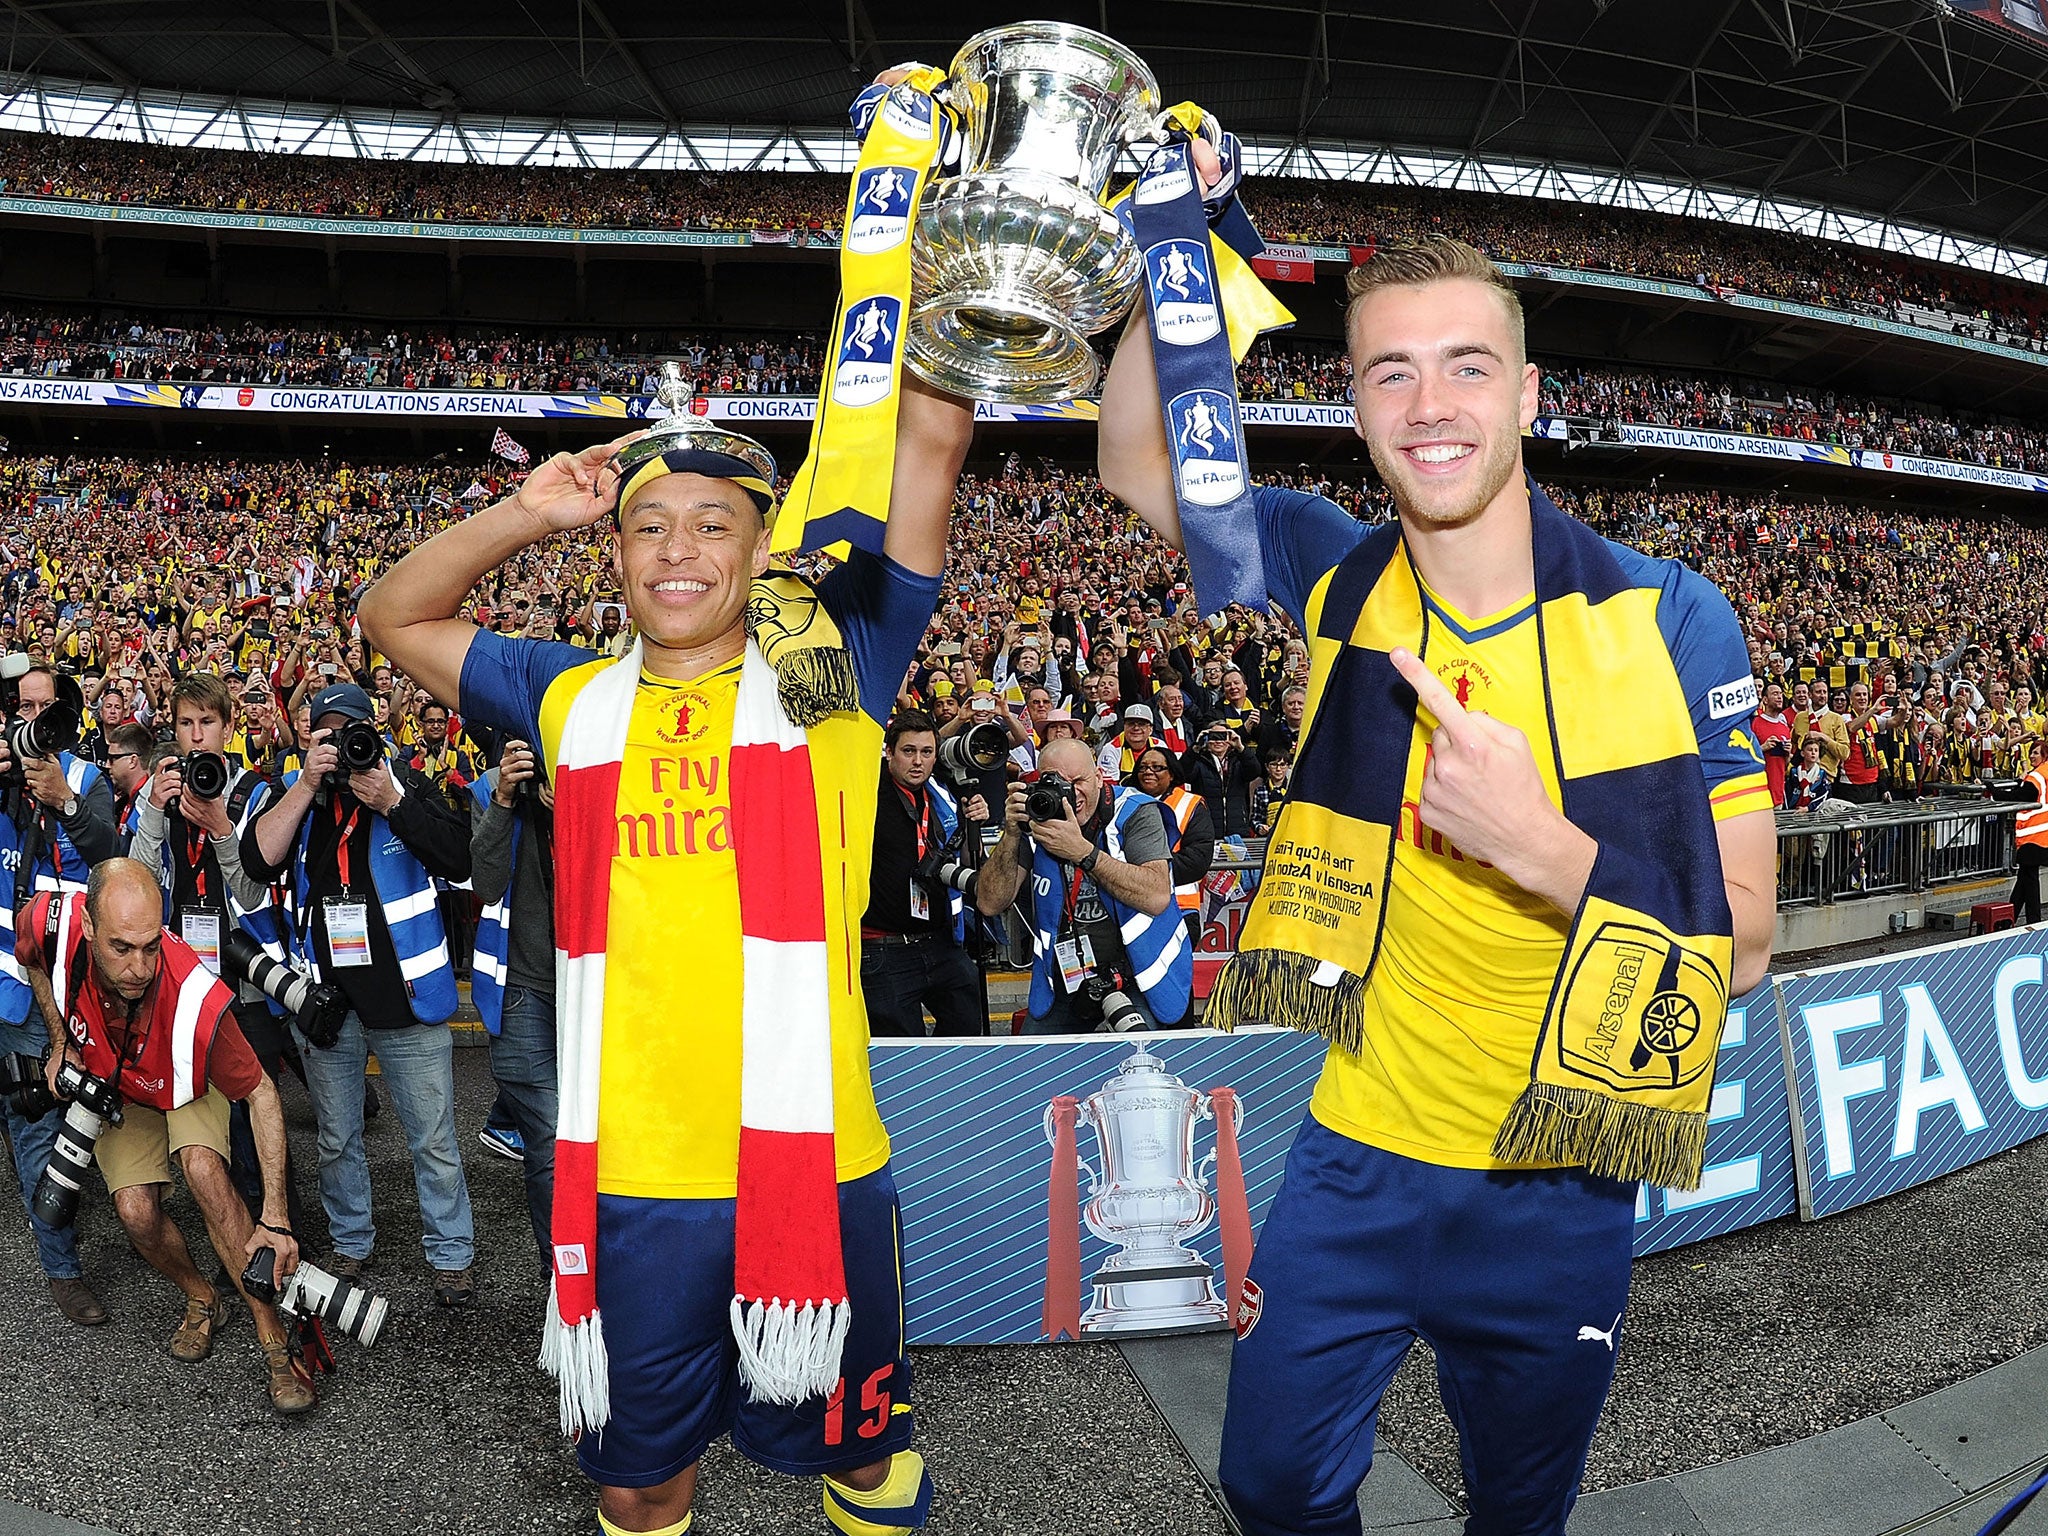 Alex Oxlade-Chamberlain and Chambers lift the FA Cup